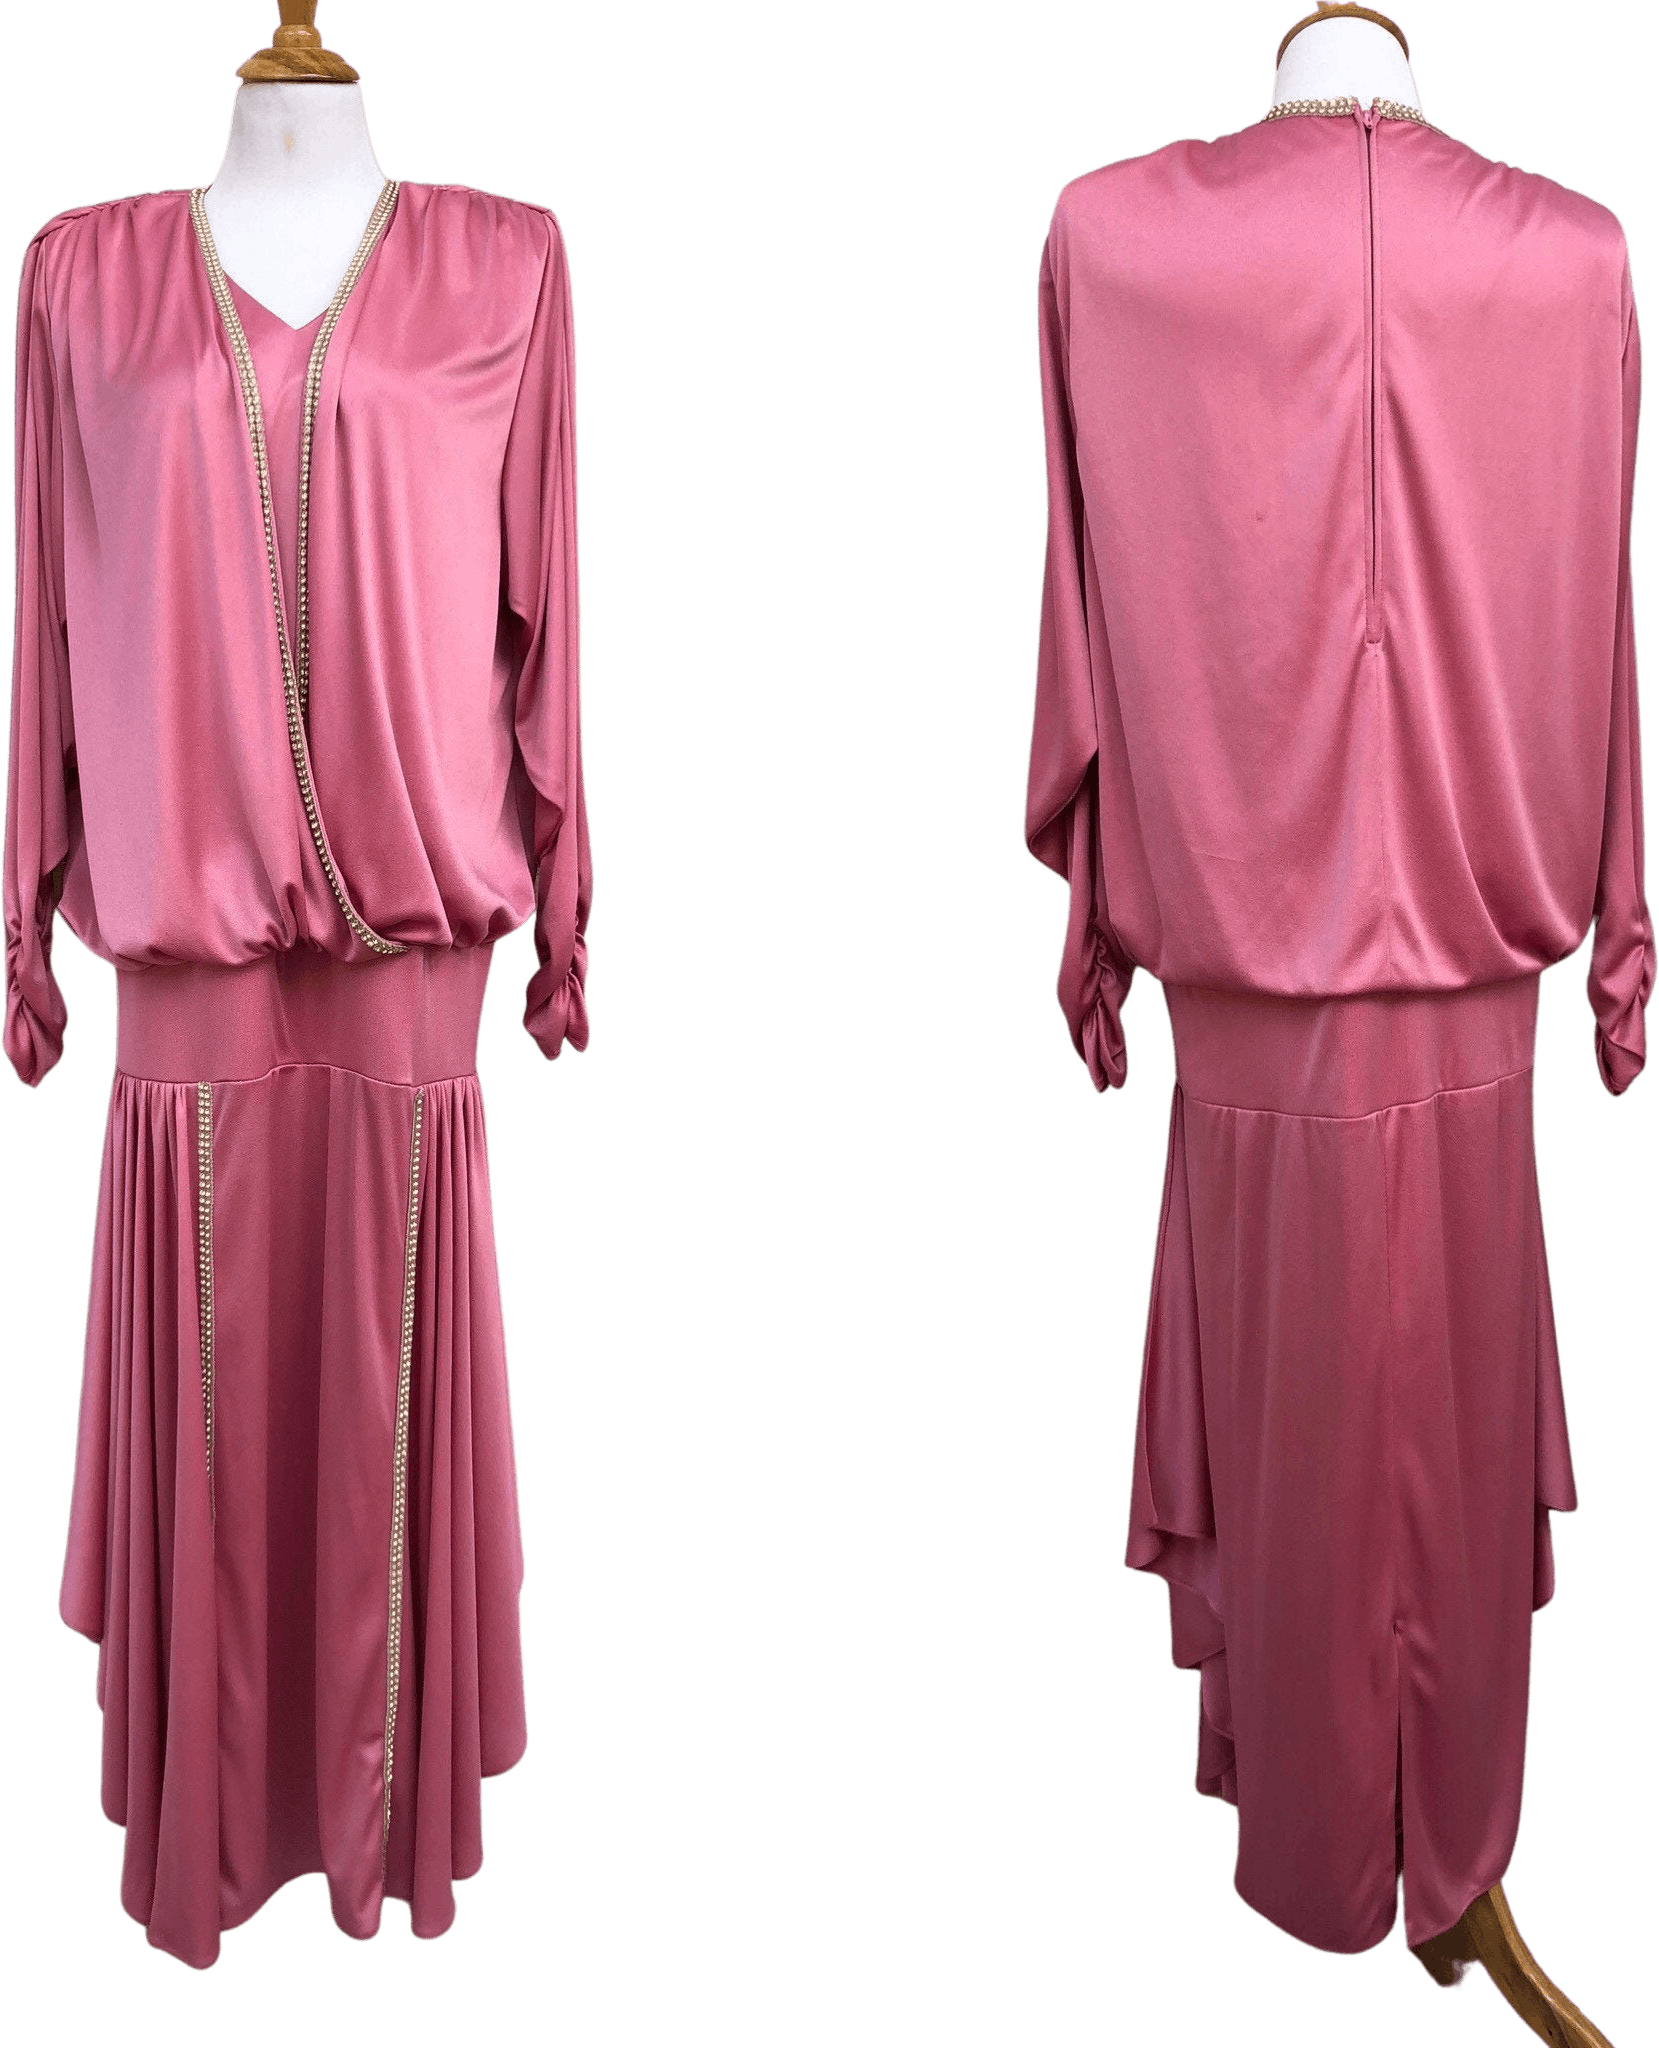 Vintage 70’s Dusty Rose Long Sleeve Party Dress with Tiered Skirt and ...